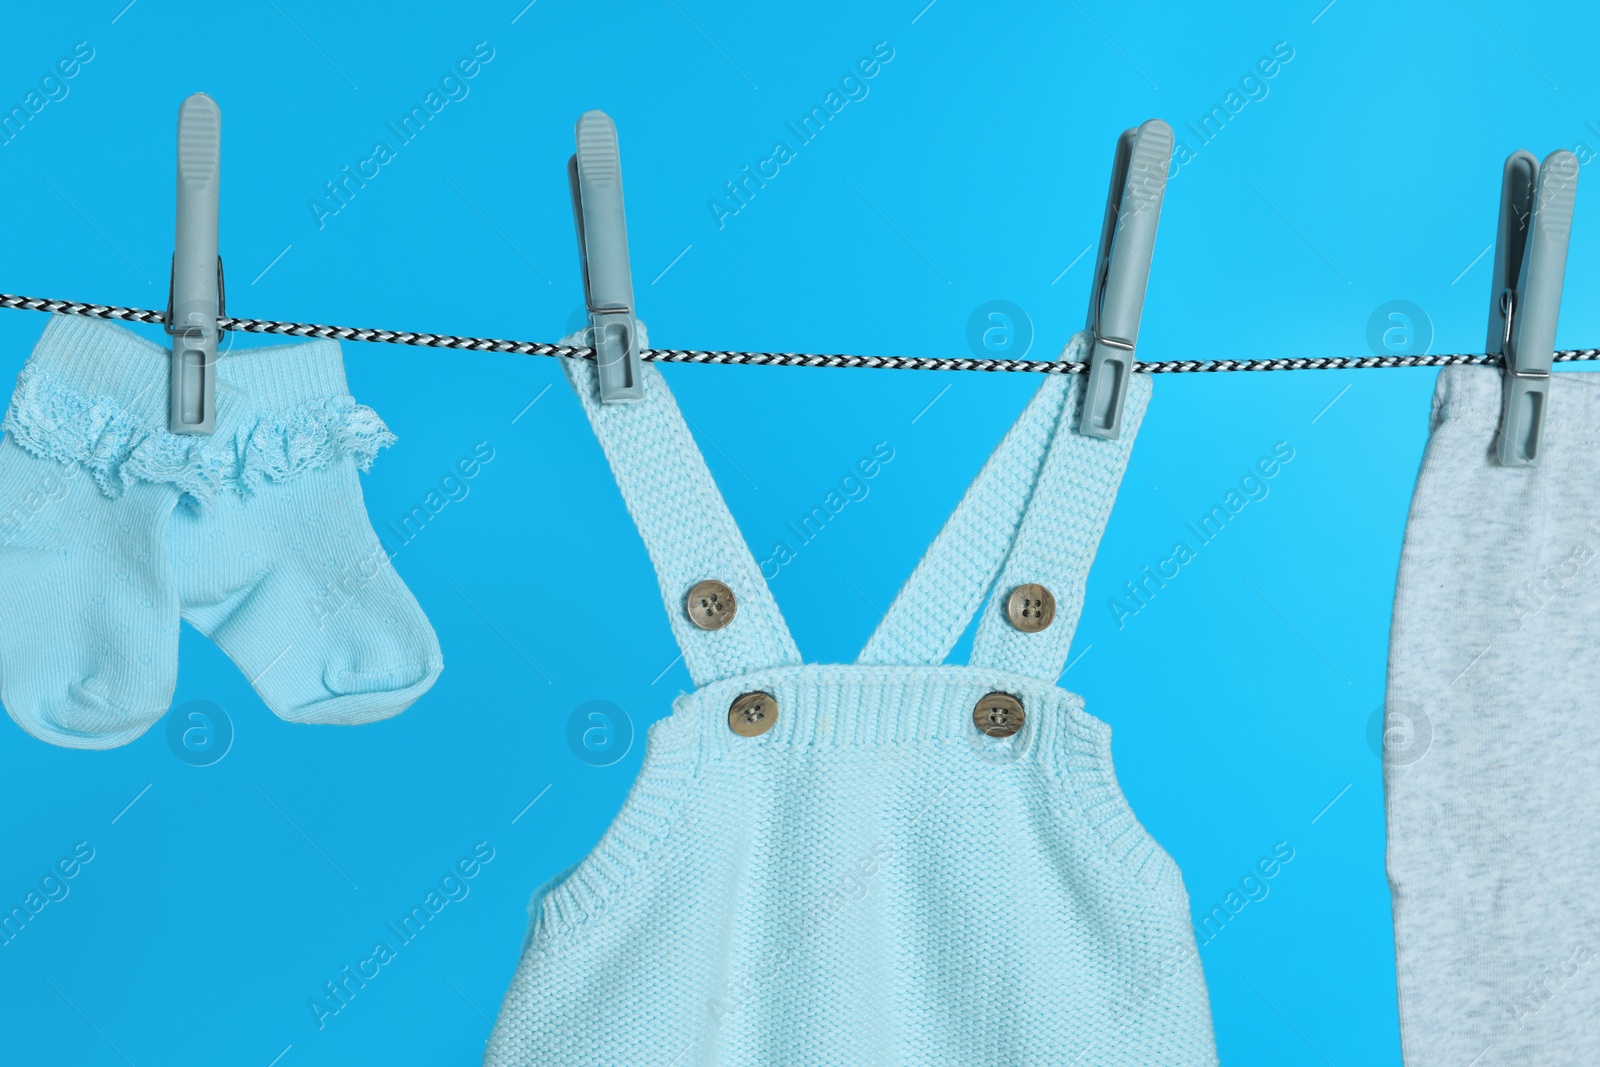 Photo of Different baby clothes drying on laundry line against light blue background, closeup